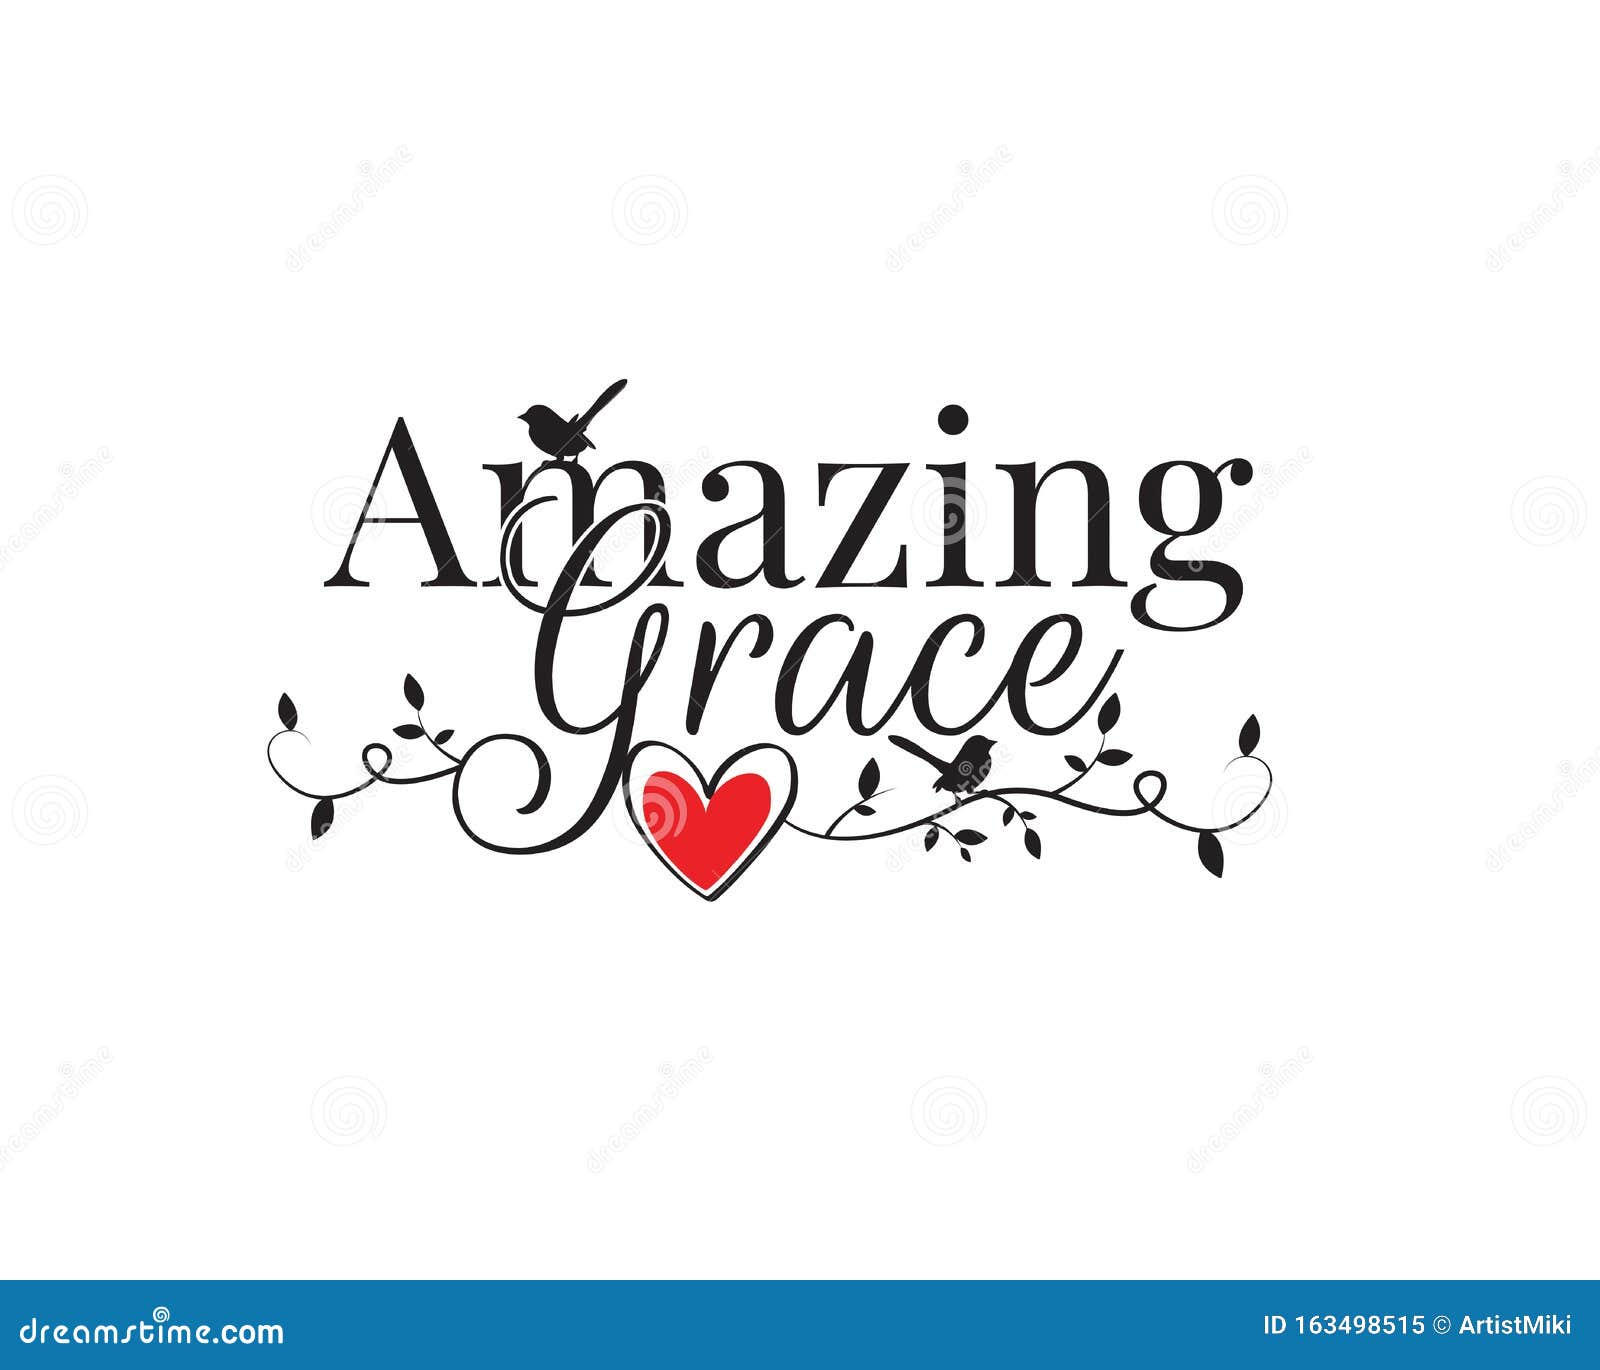 amazing grace, . wording , lettering. beautiful quotes, wall decals, wall artwork, poster  